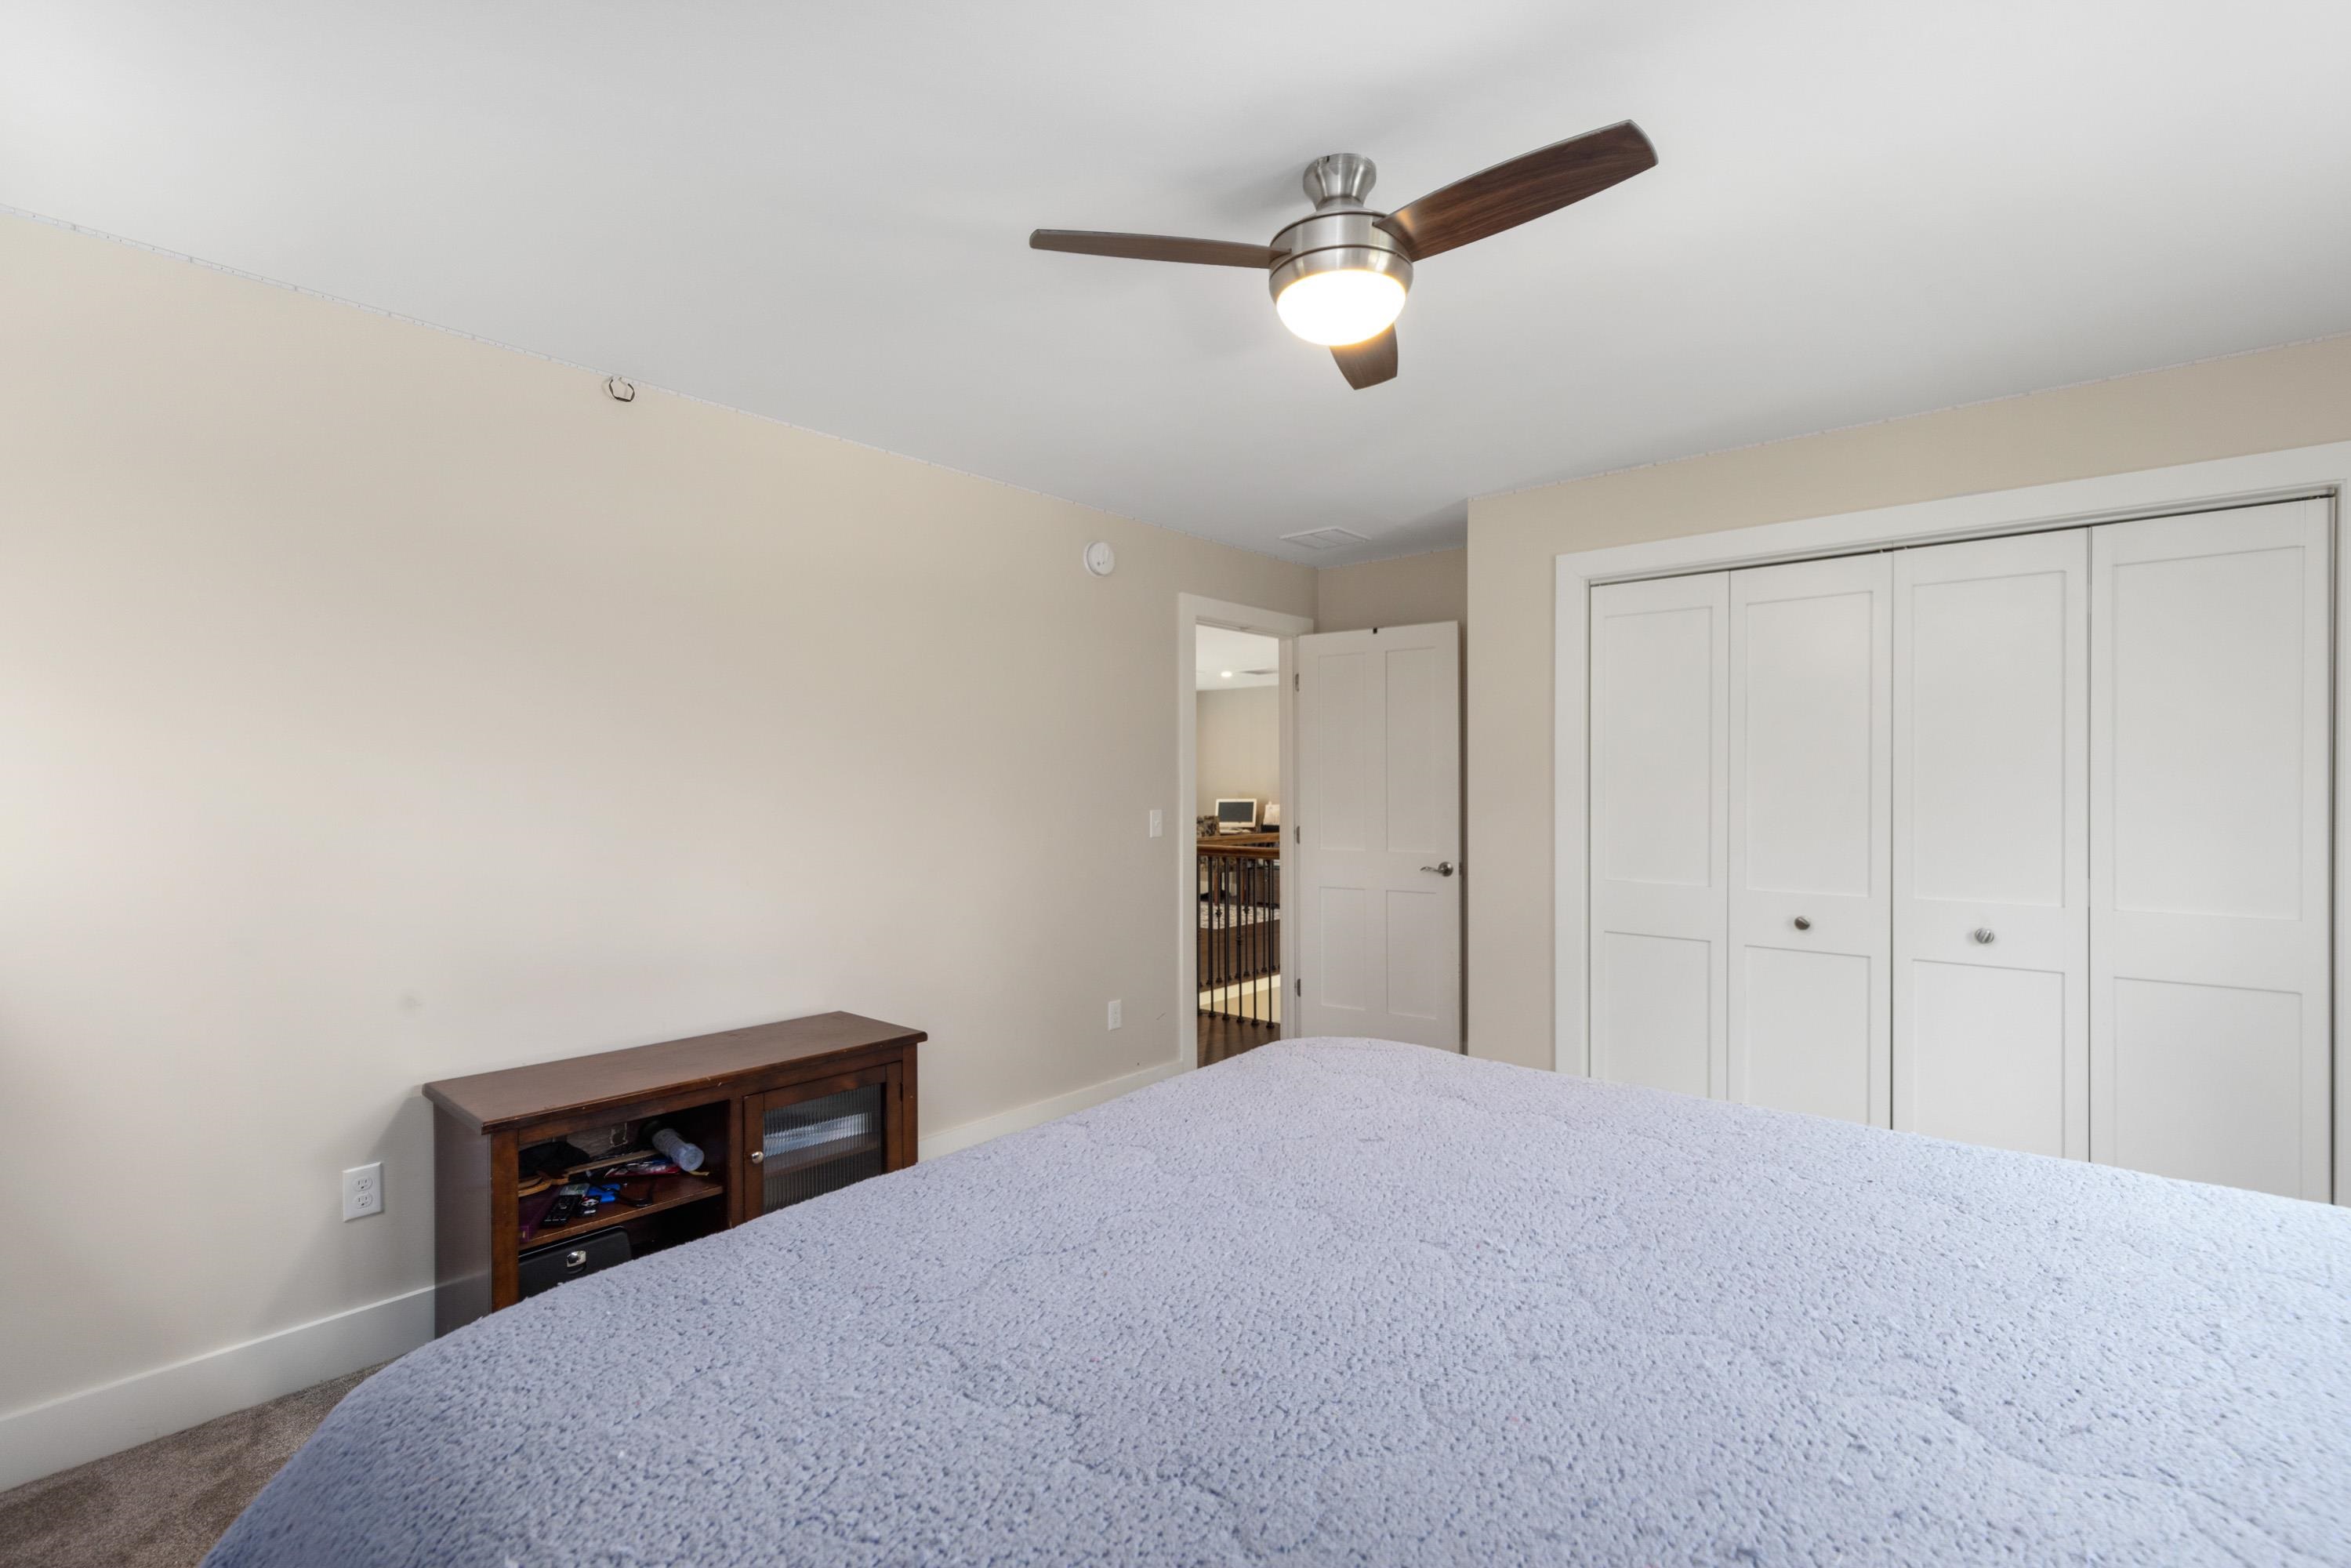 4th bedroom, remote ceiling fans in every room